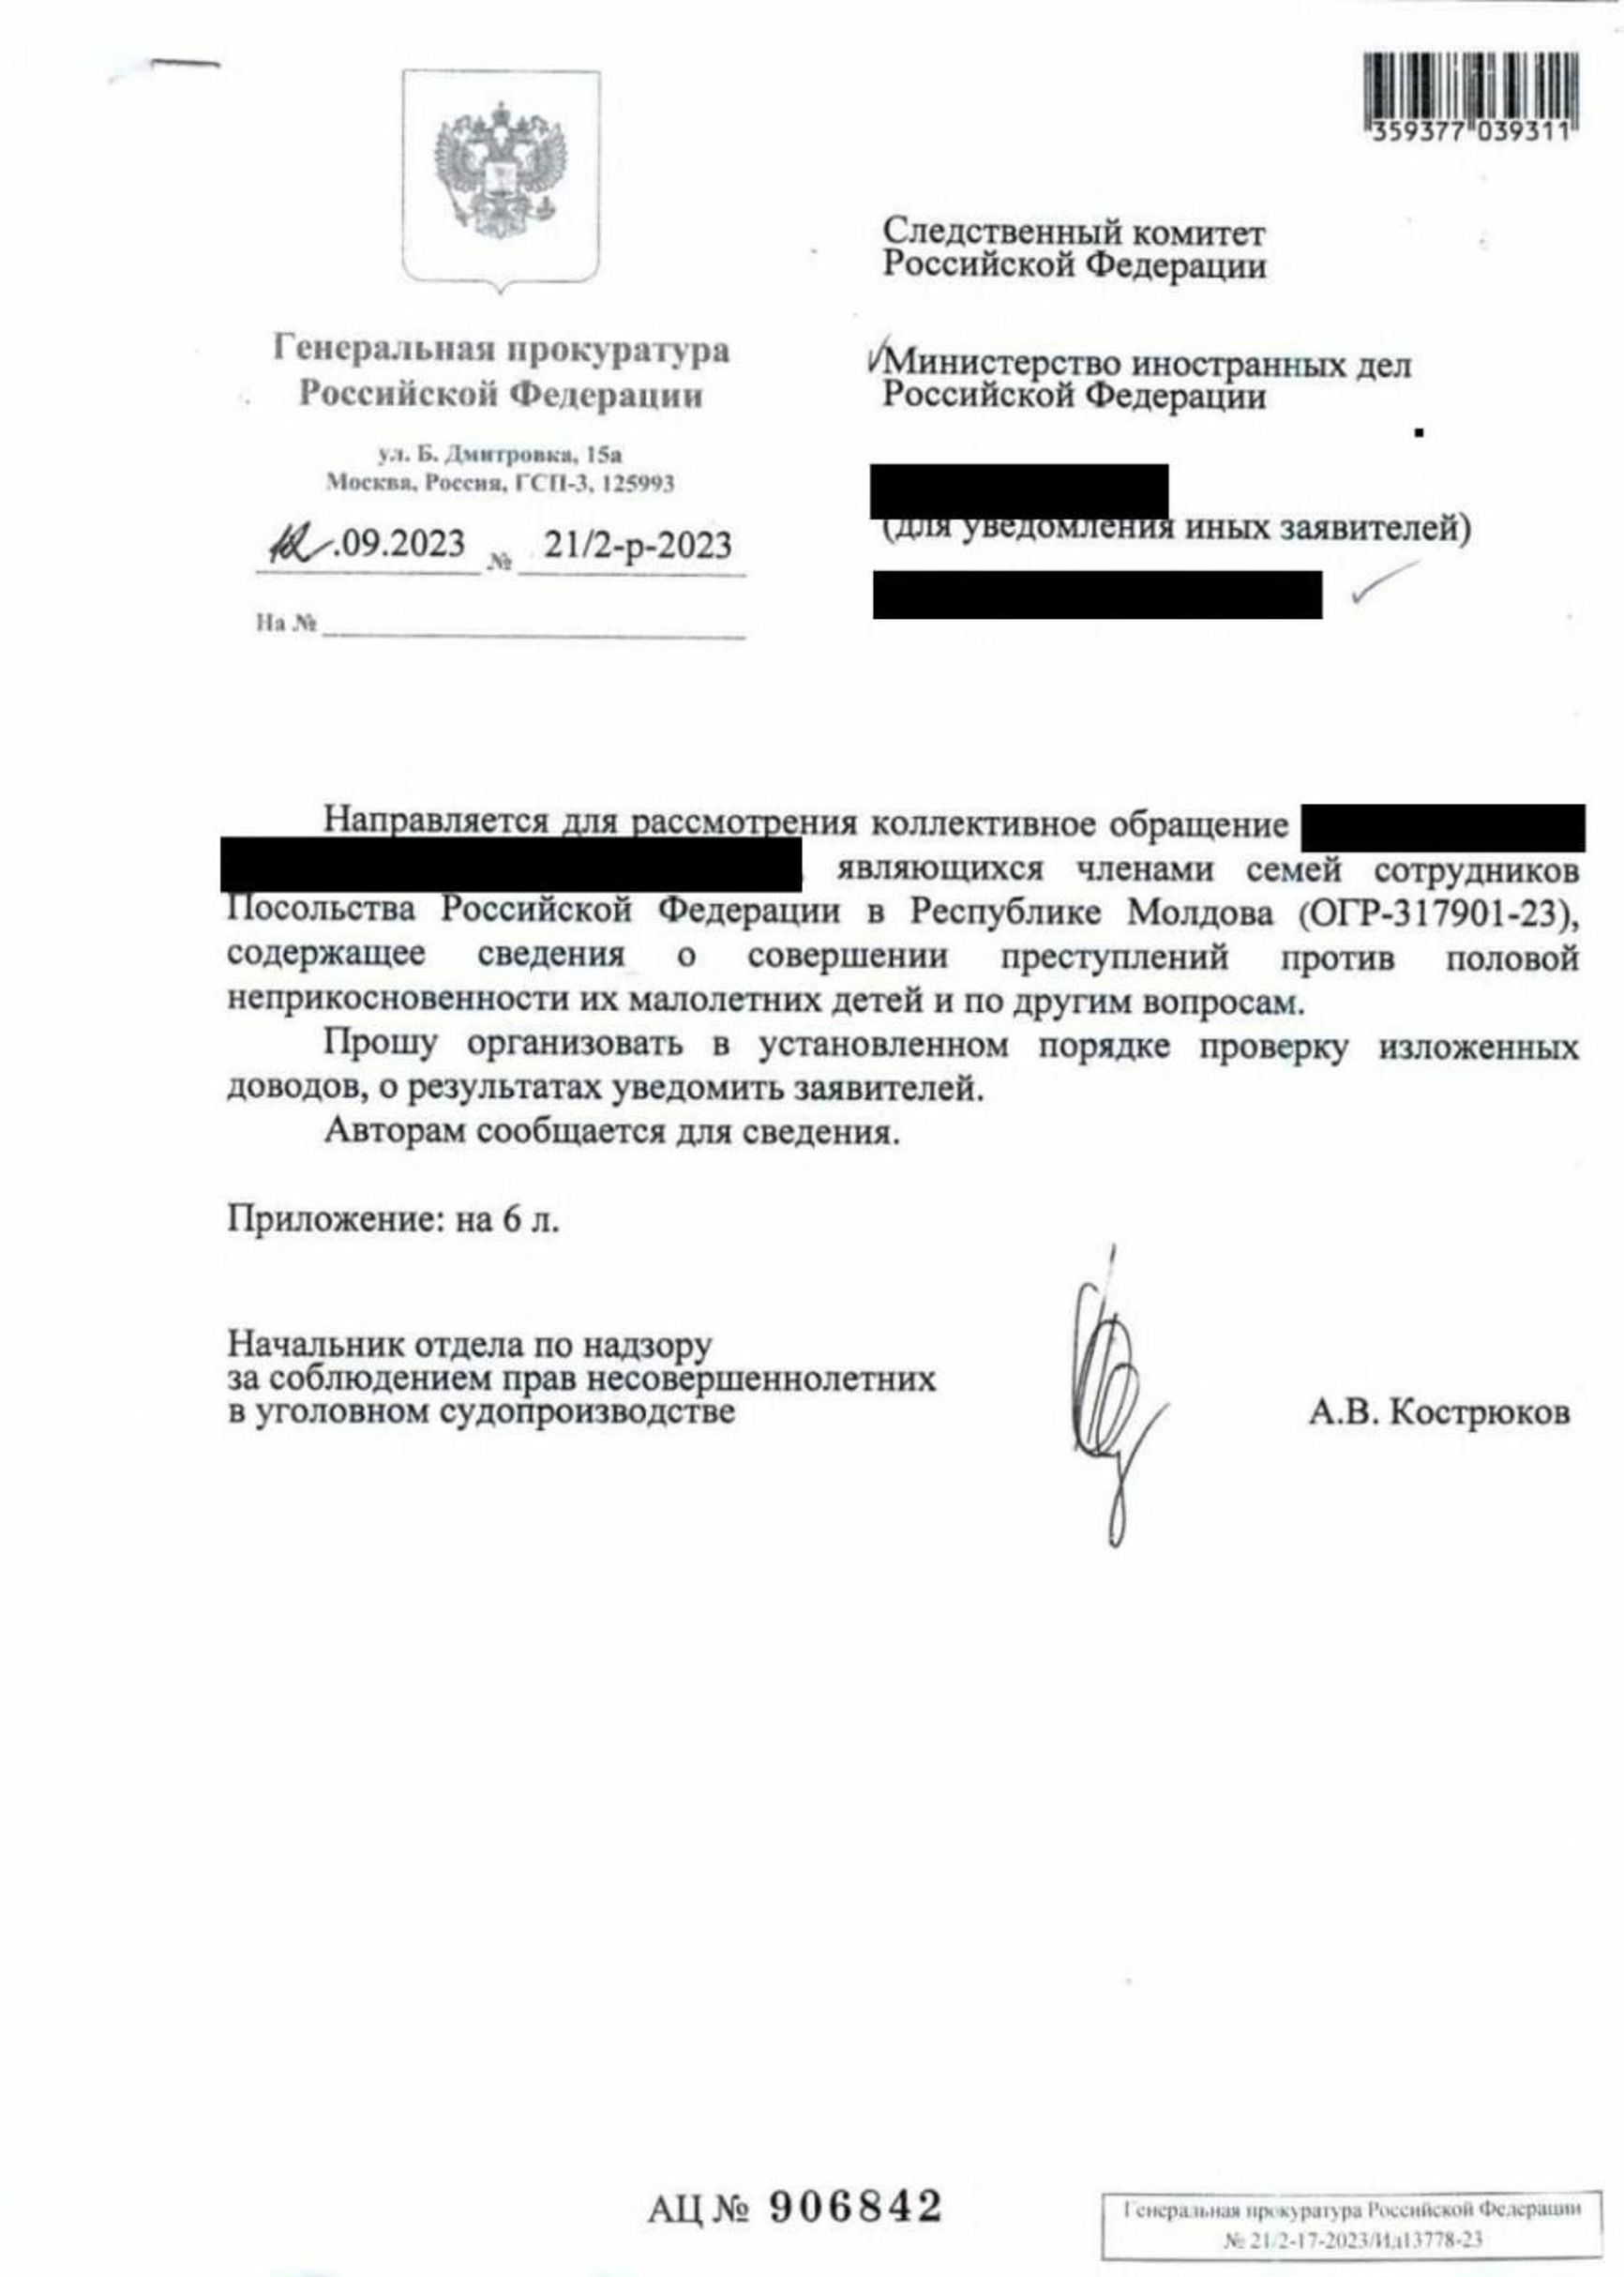 Image of the official notice to Russia's Investigative Committee on the collective complaint regarding cases of child molestation and other matters